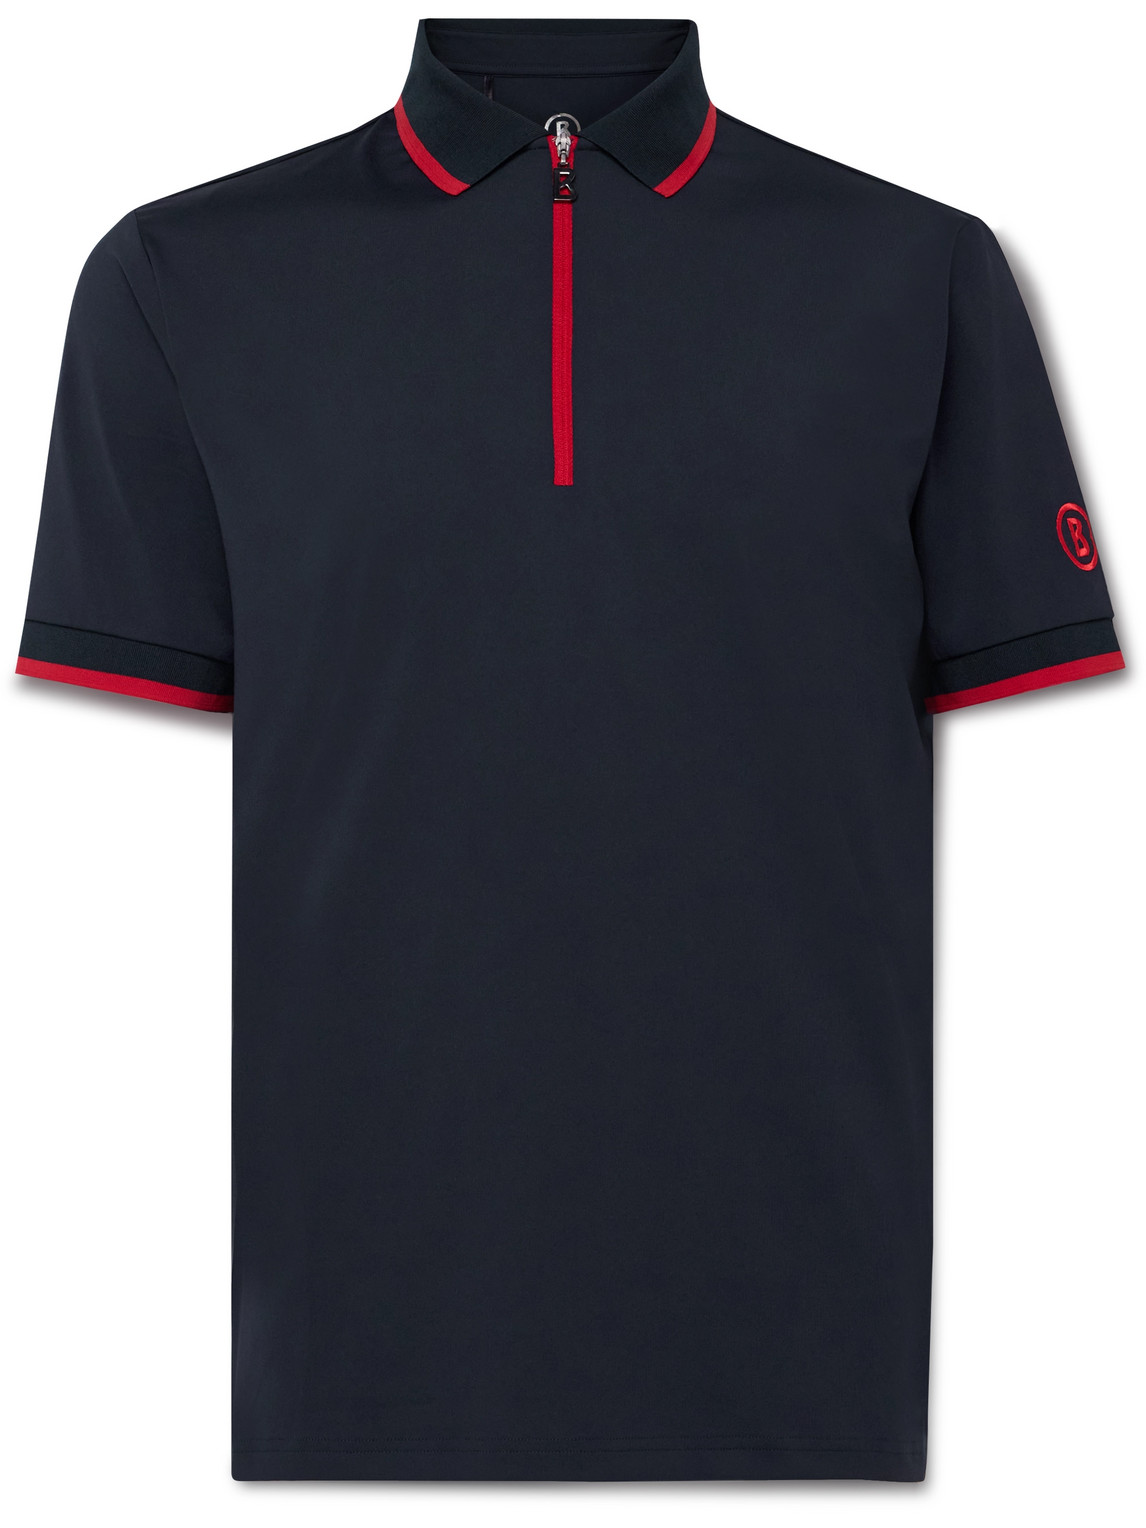 BOGNER CODY CONTRAST-TIPPED STRETCH-JERSEY GOLF POLO SHIRT